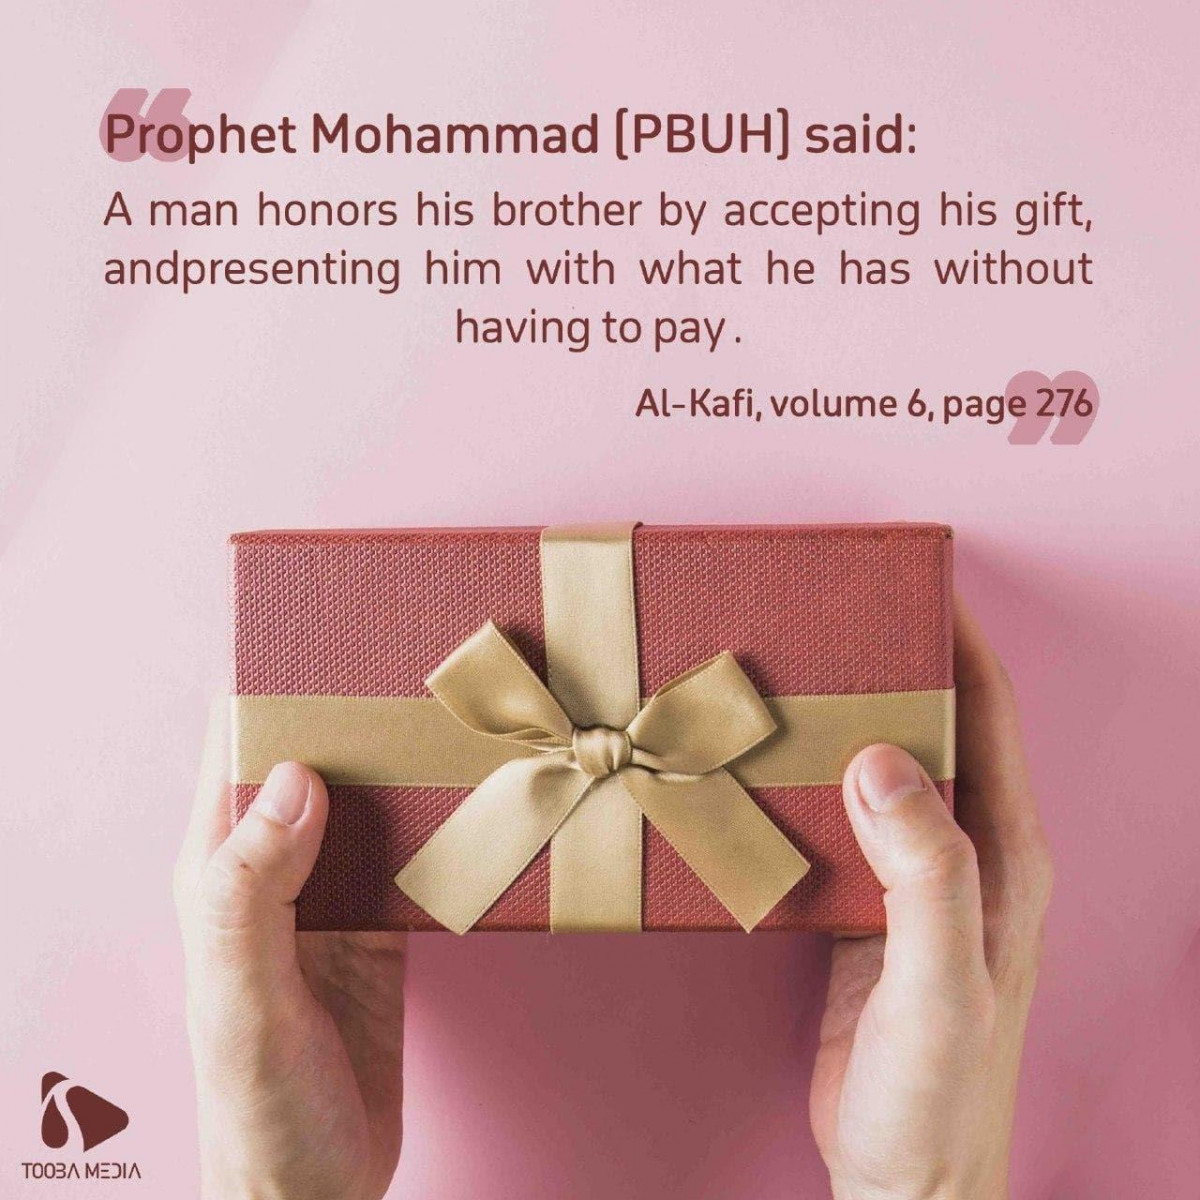 A man honors his brother by accepting his gift, and presenting him with what he has without having to pay